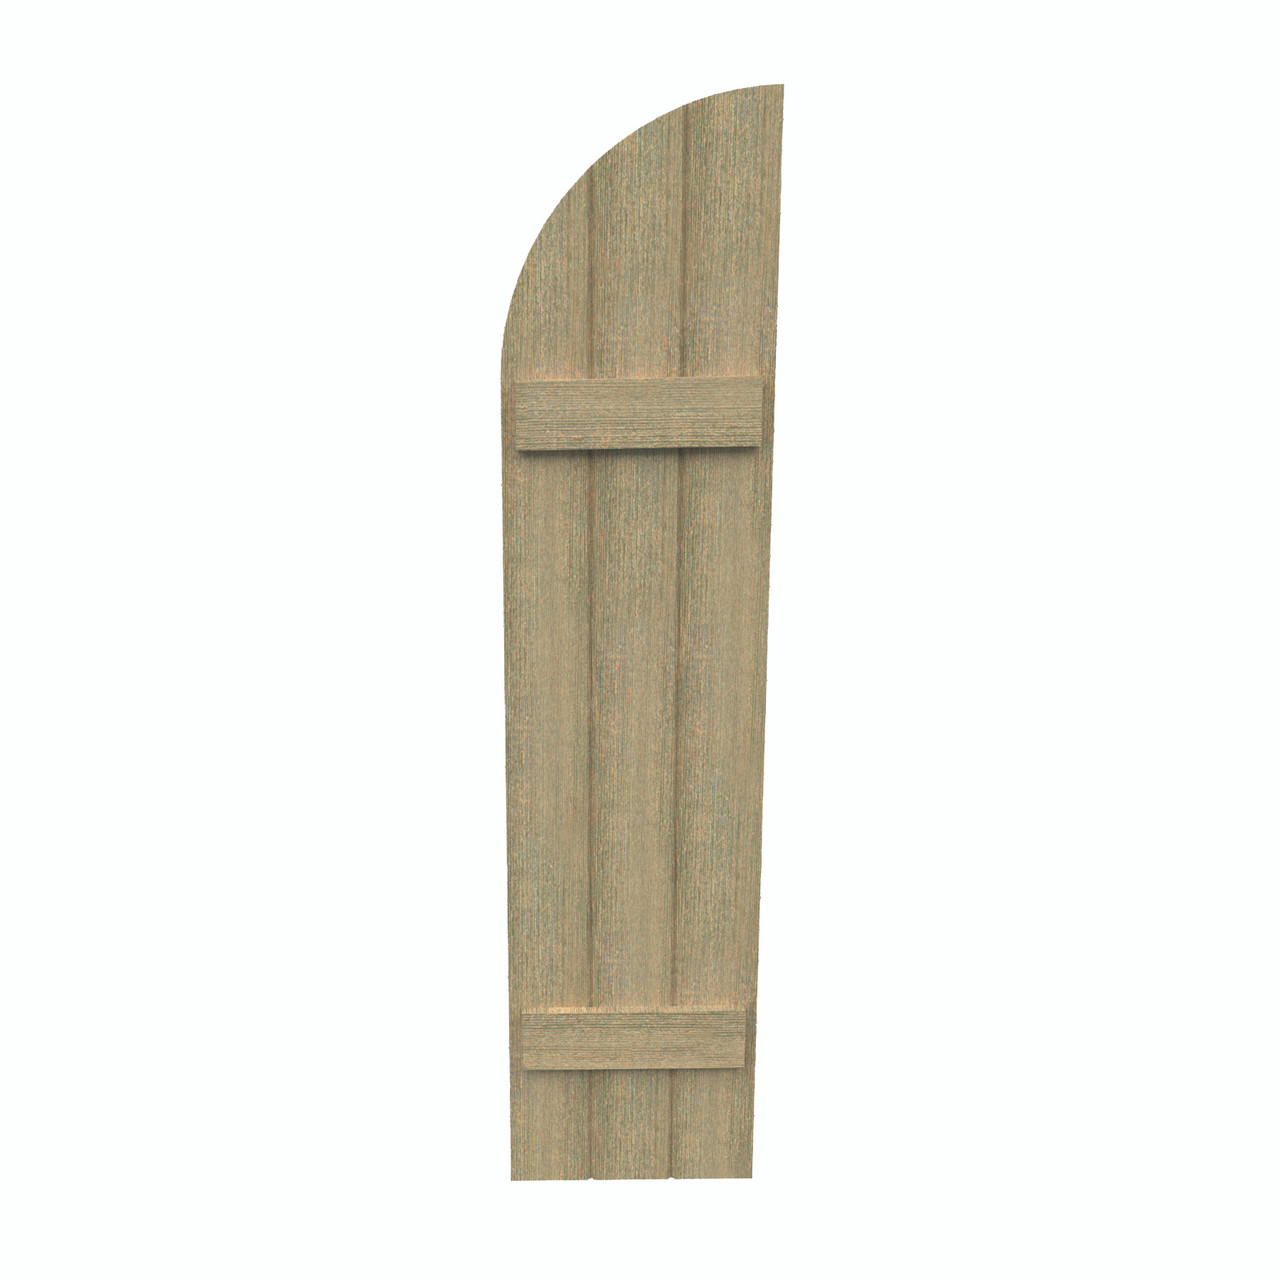 18 inch by 43 inch Quarter Round Shutter with 3-Boards